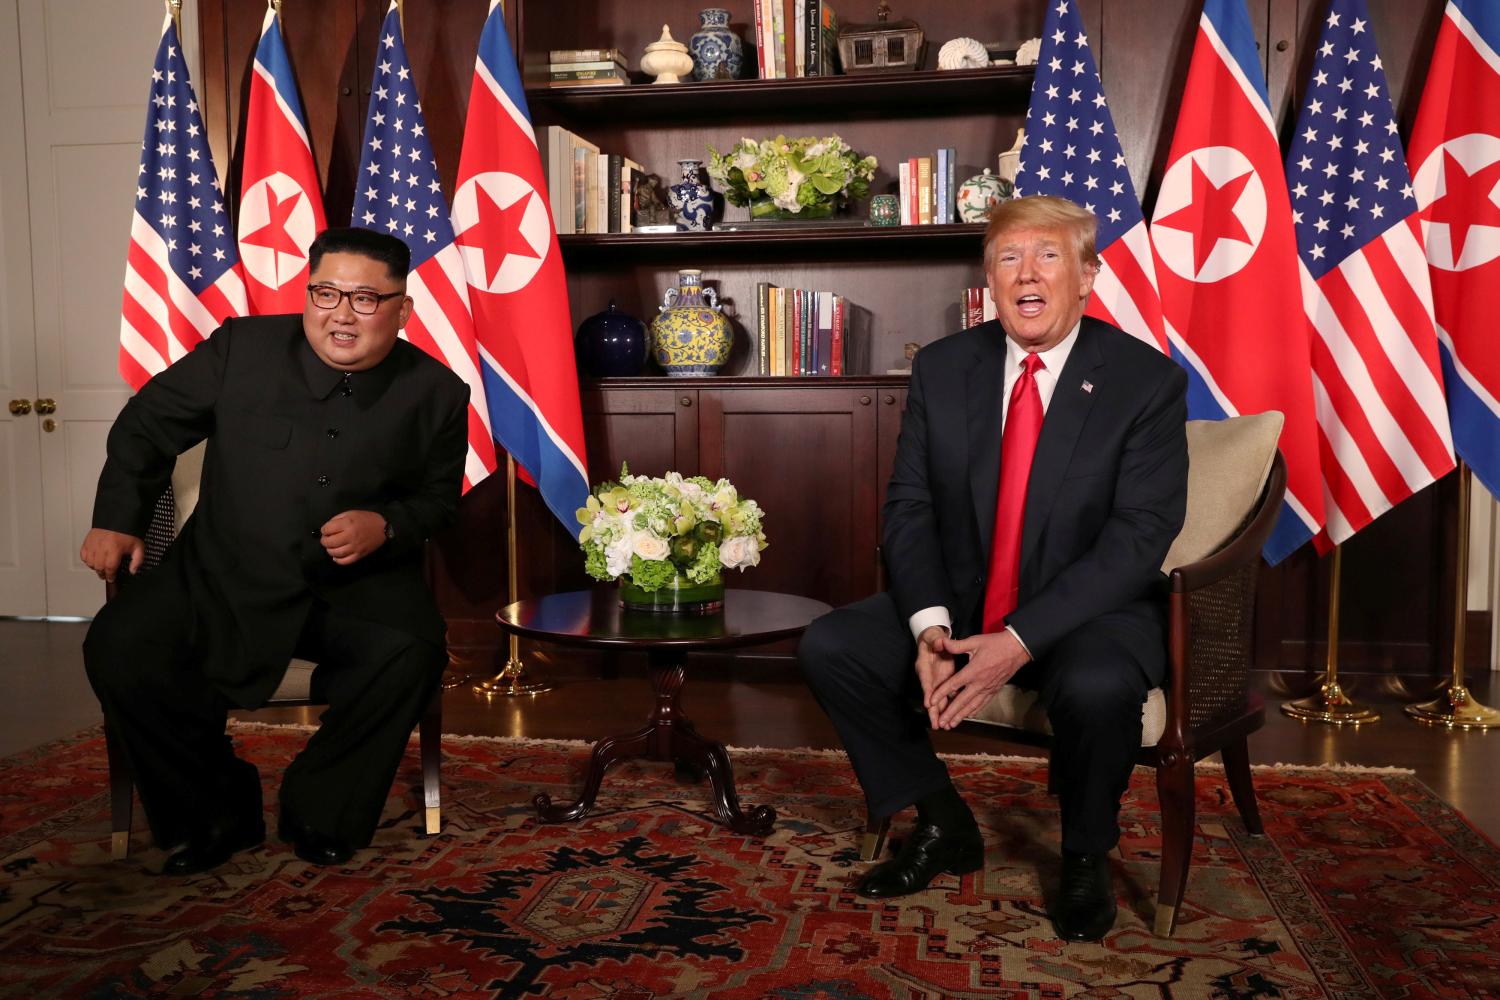 U.S. President Donald Trump sits next to North Korea's leader Kim Jong Un before their bilateral meeting at the Capella Hotel on Sentosa island in Singapore June 12, 2018. REUTERS/Jonathan Ernst     TPX IMAGES OF THE DAY - RC1D123560A0